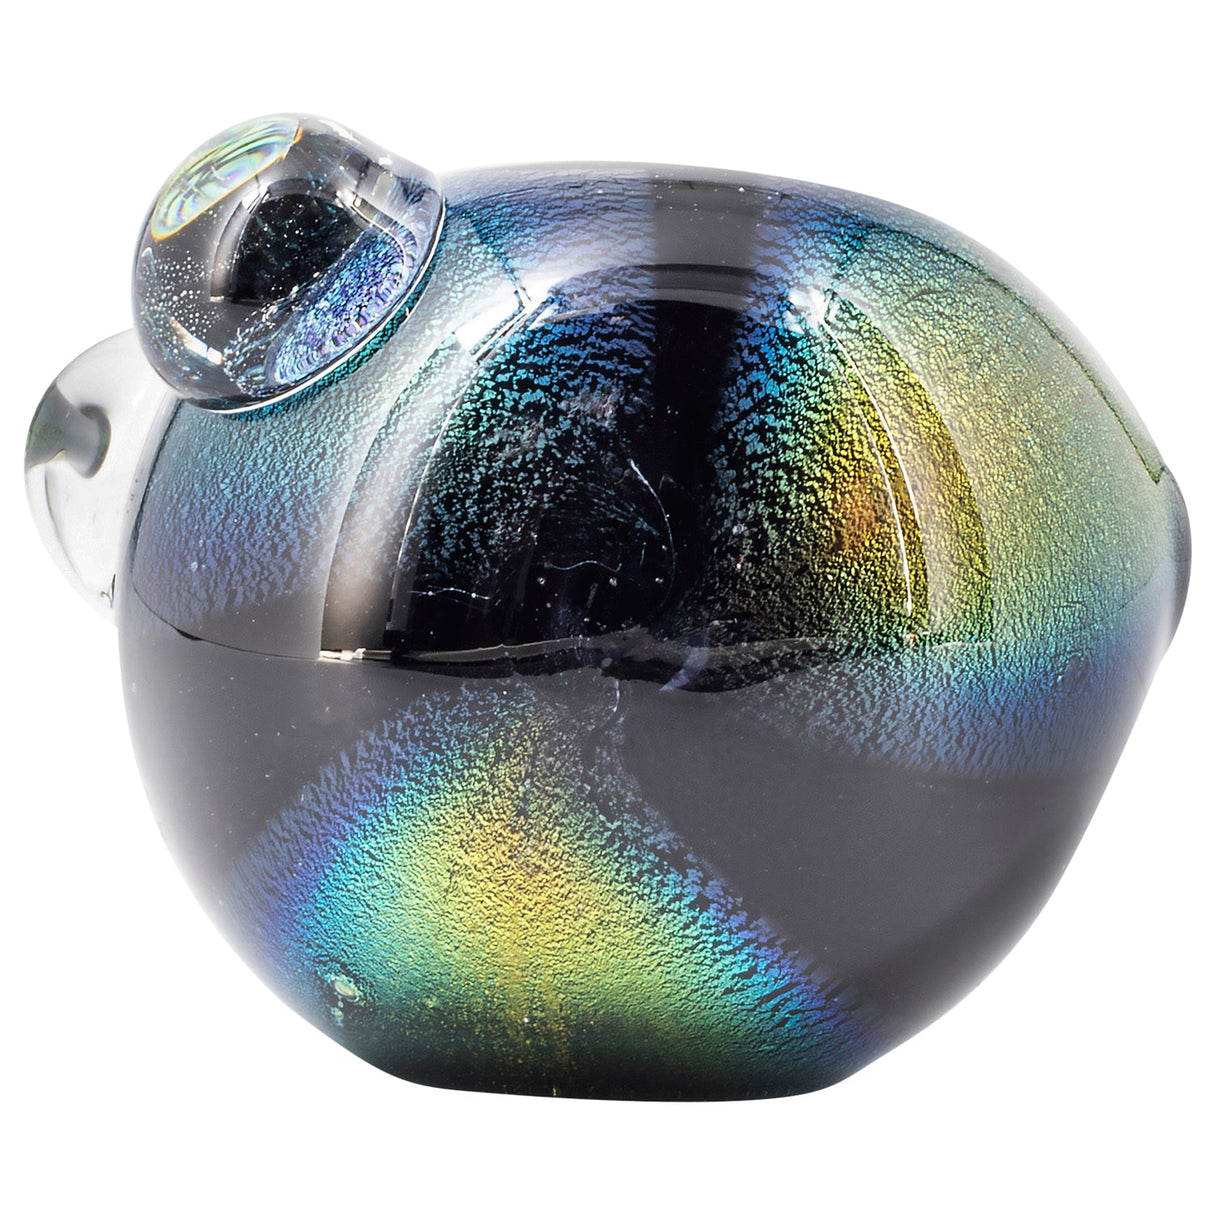 LA Pipes Dichro Spoon Pipe with Clear Marbles, Borosilicate Glass, 4" Length